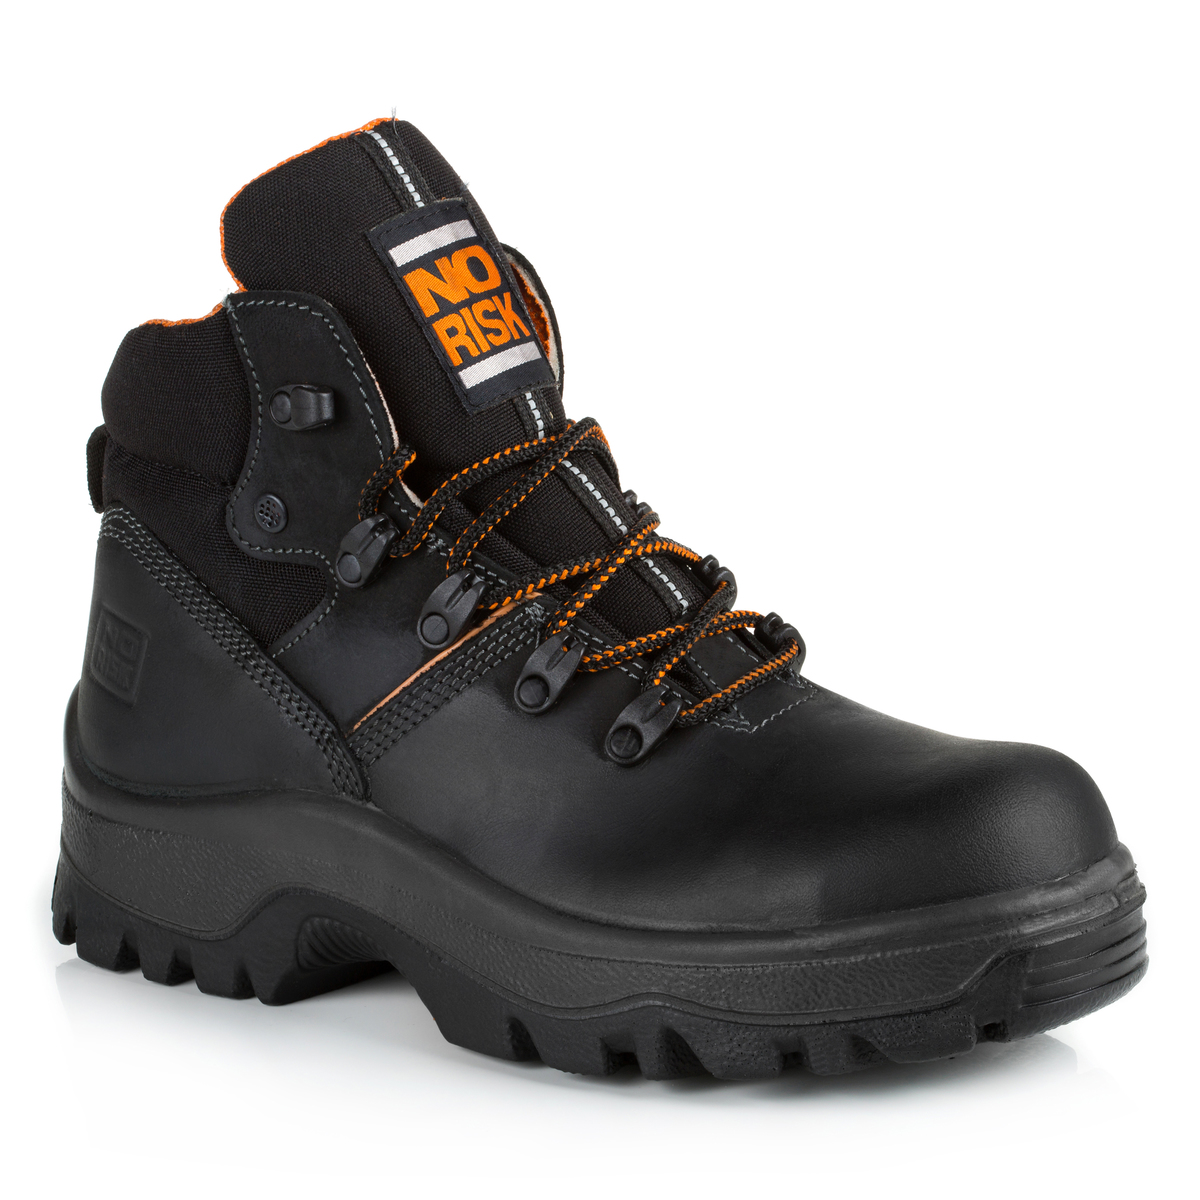 No Risk Armstrong S3 Black Boot | Clothing & Footwear |Farming ...